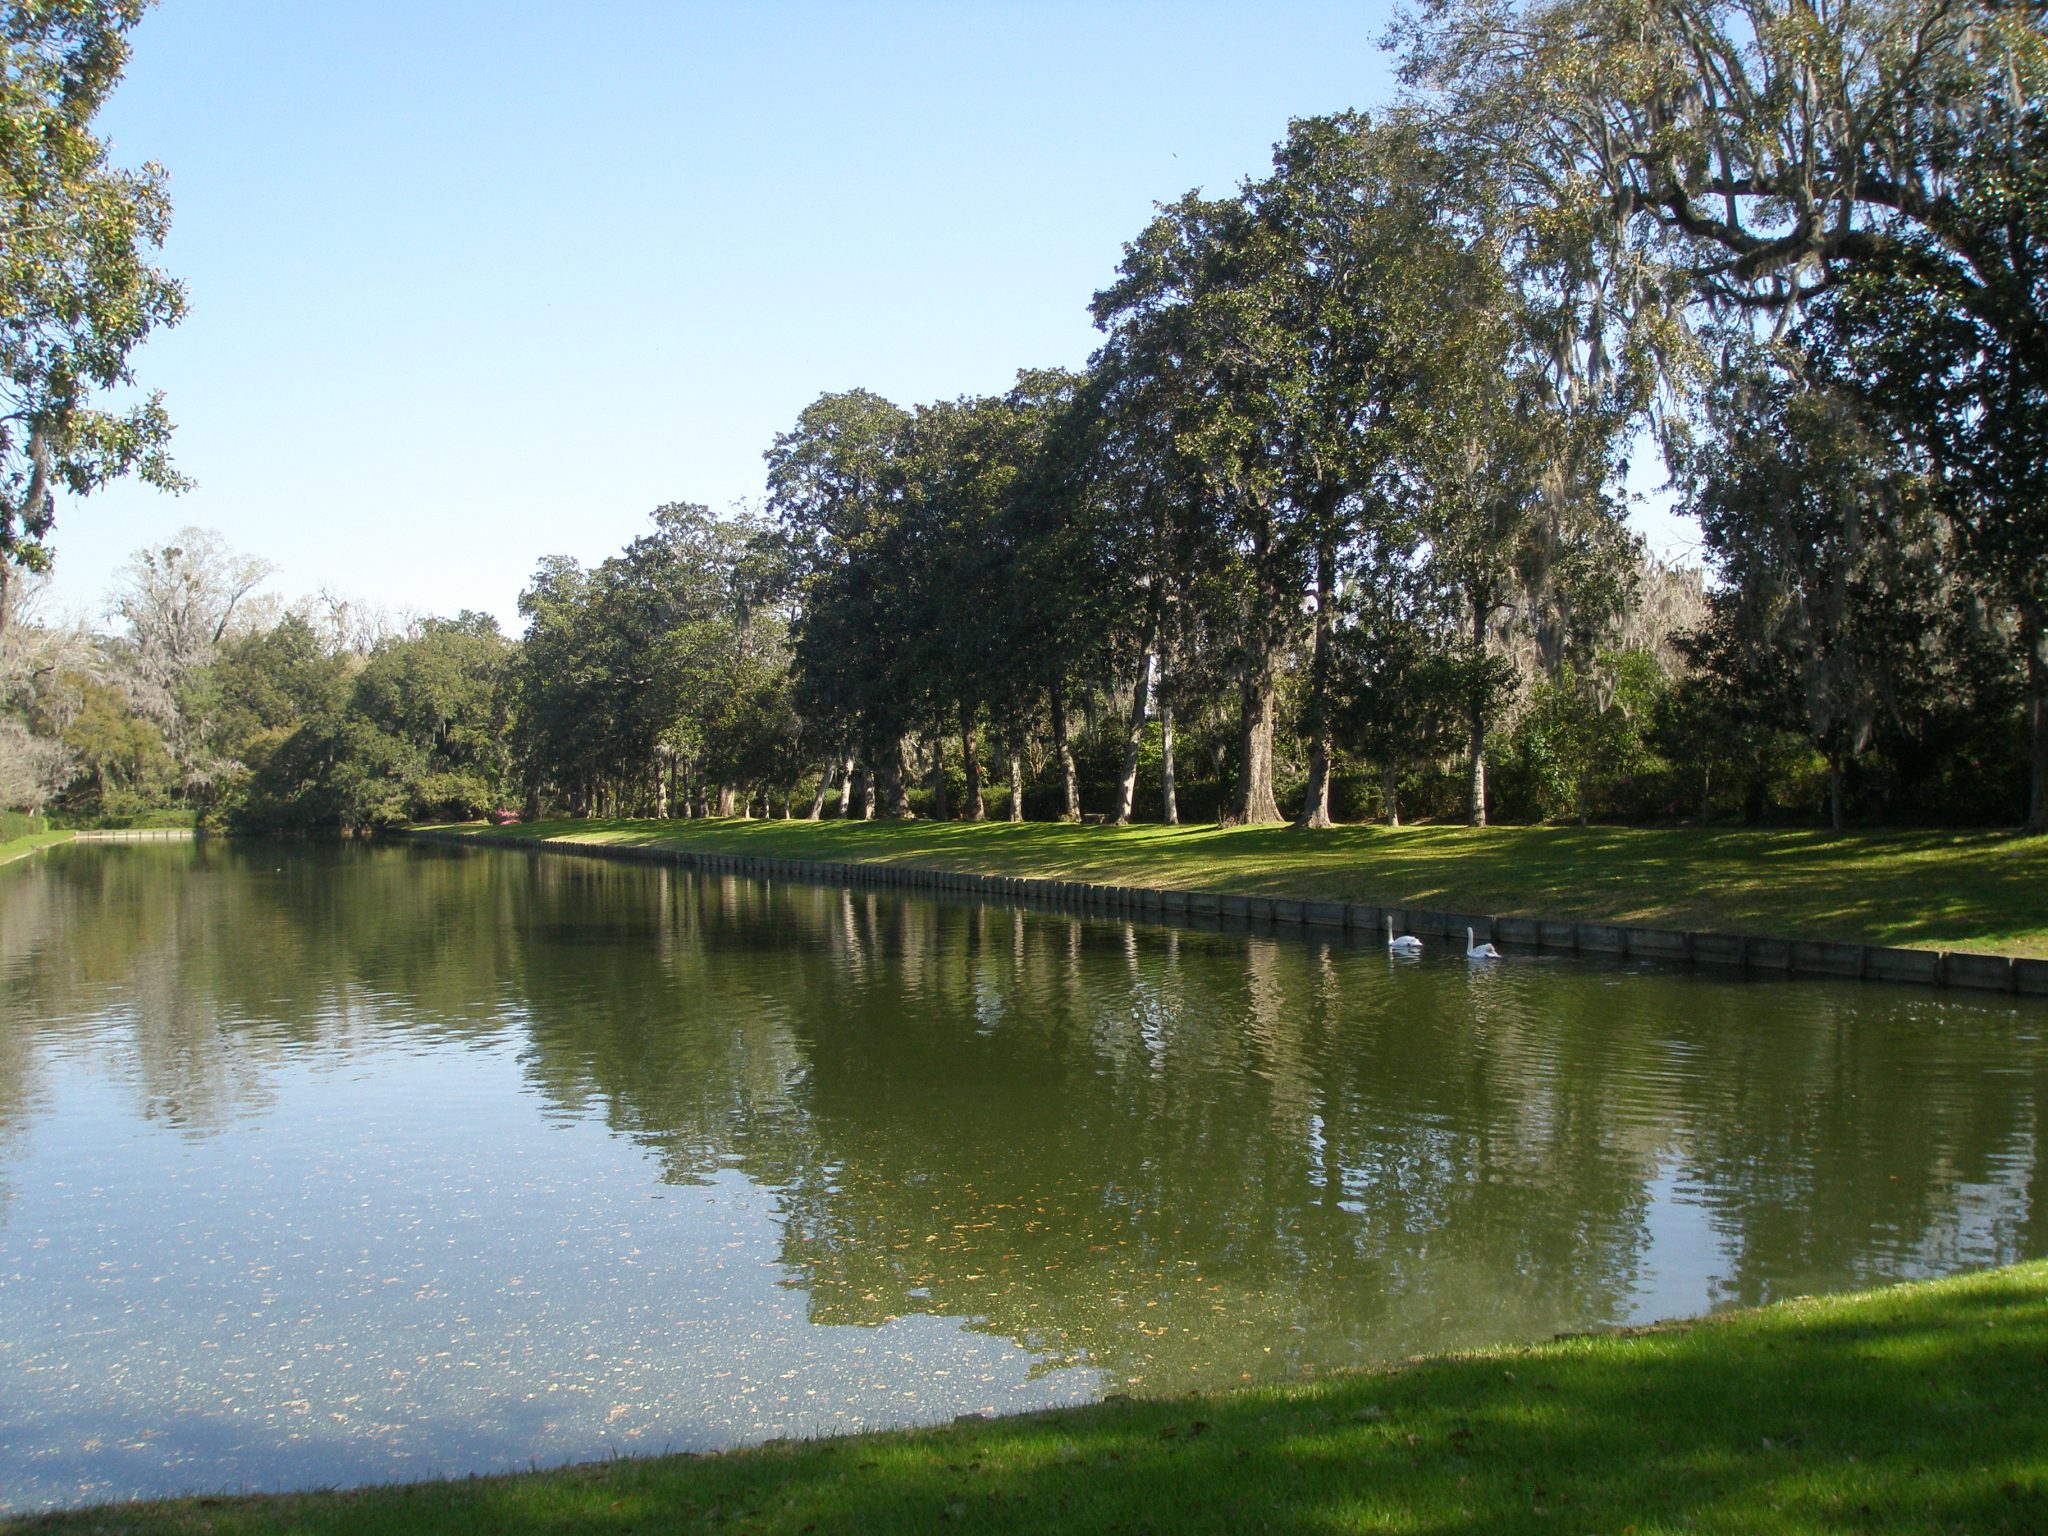 The huge, rectangular Reflection Pool, enclosed by precisely-positioned Southern Magnolias.